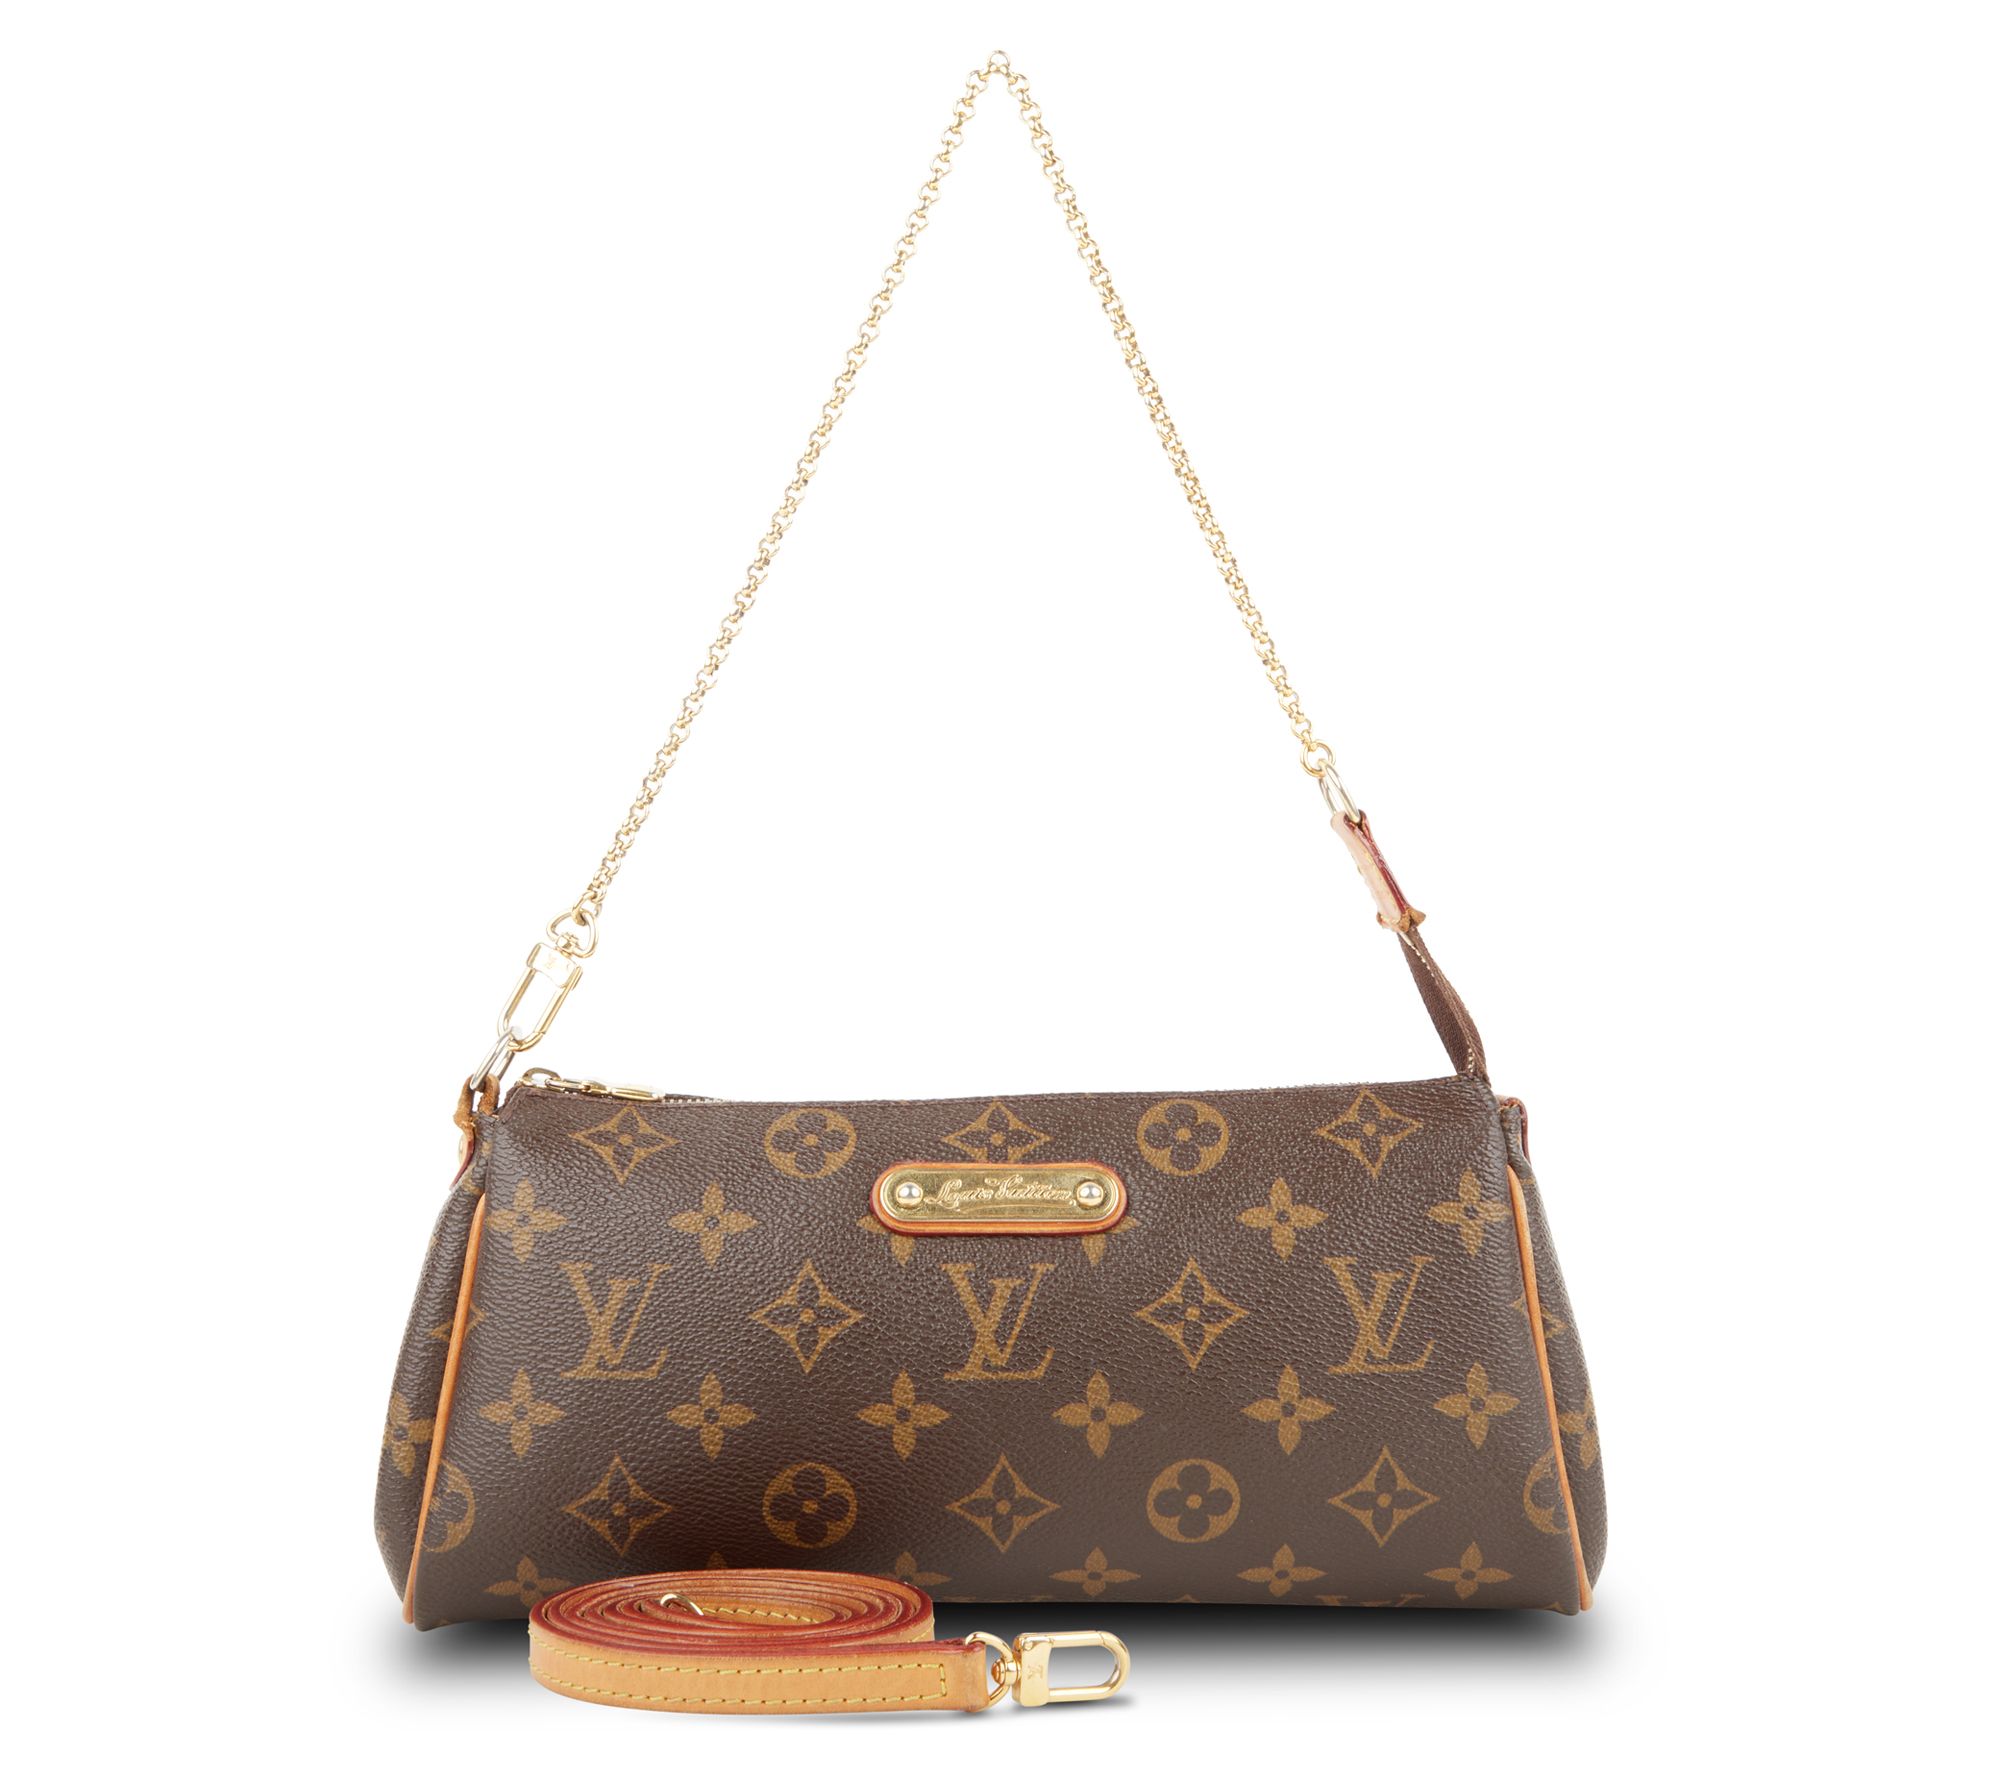 Louis Vuitton Pre-Owned Women's Fabric Clutch Bag - Brown - One Size